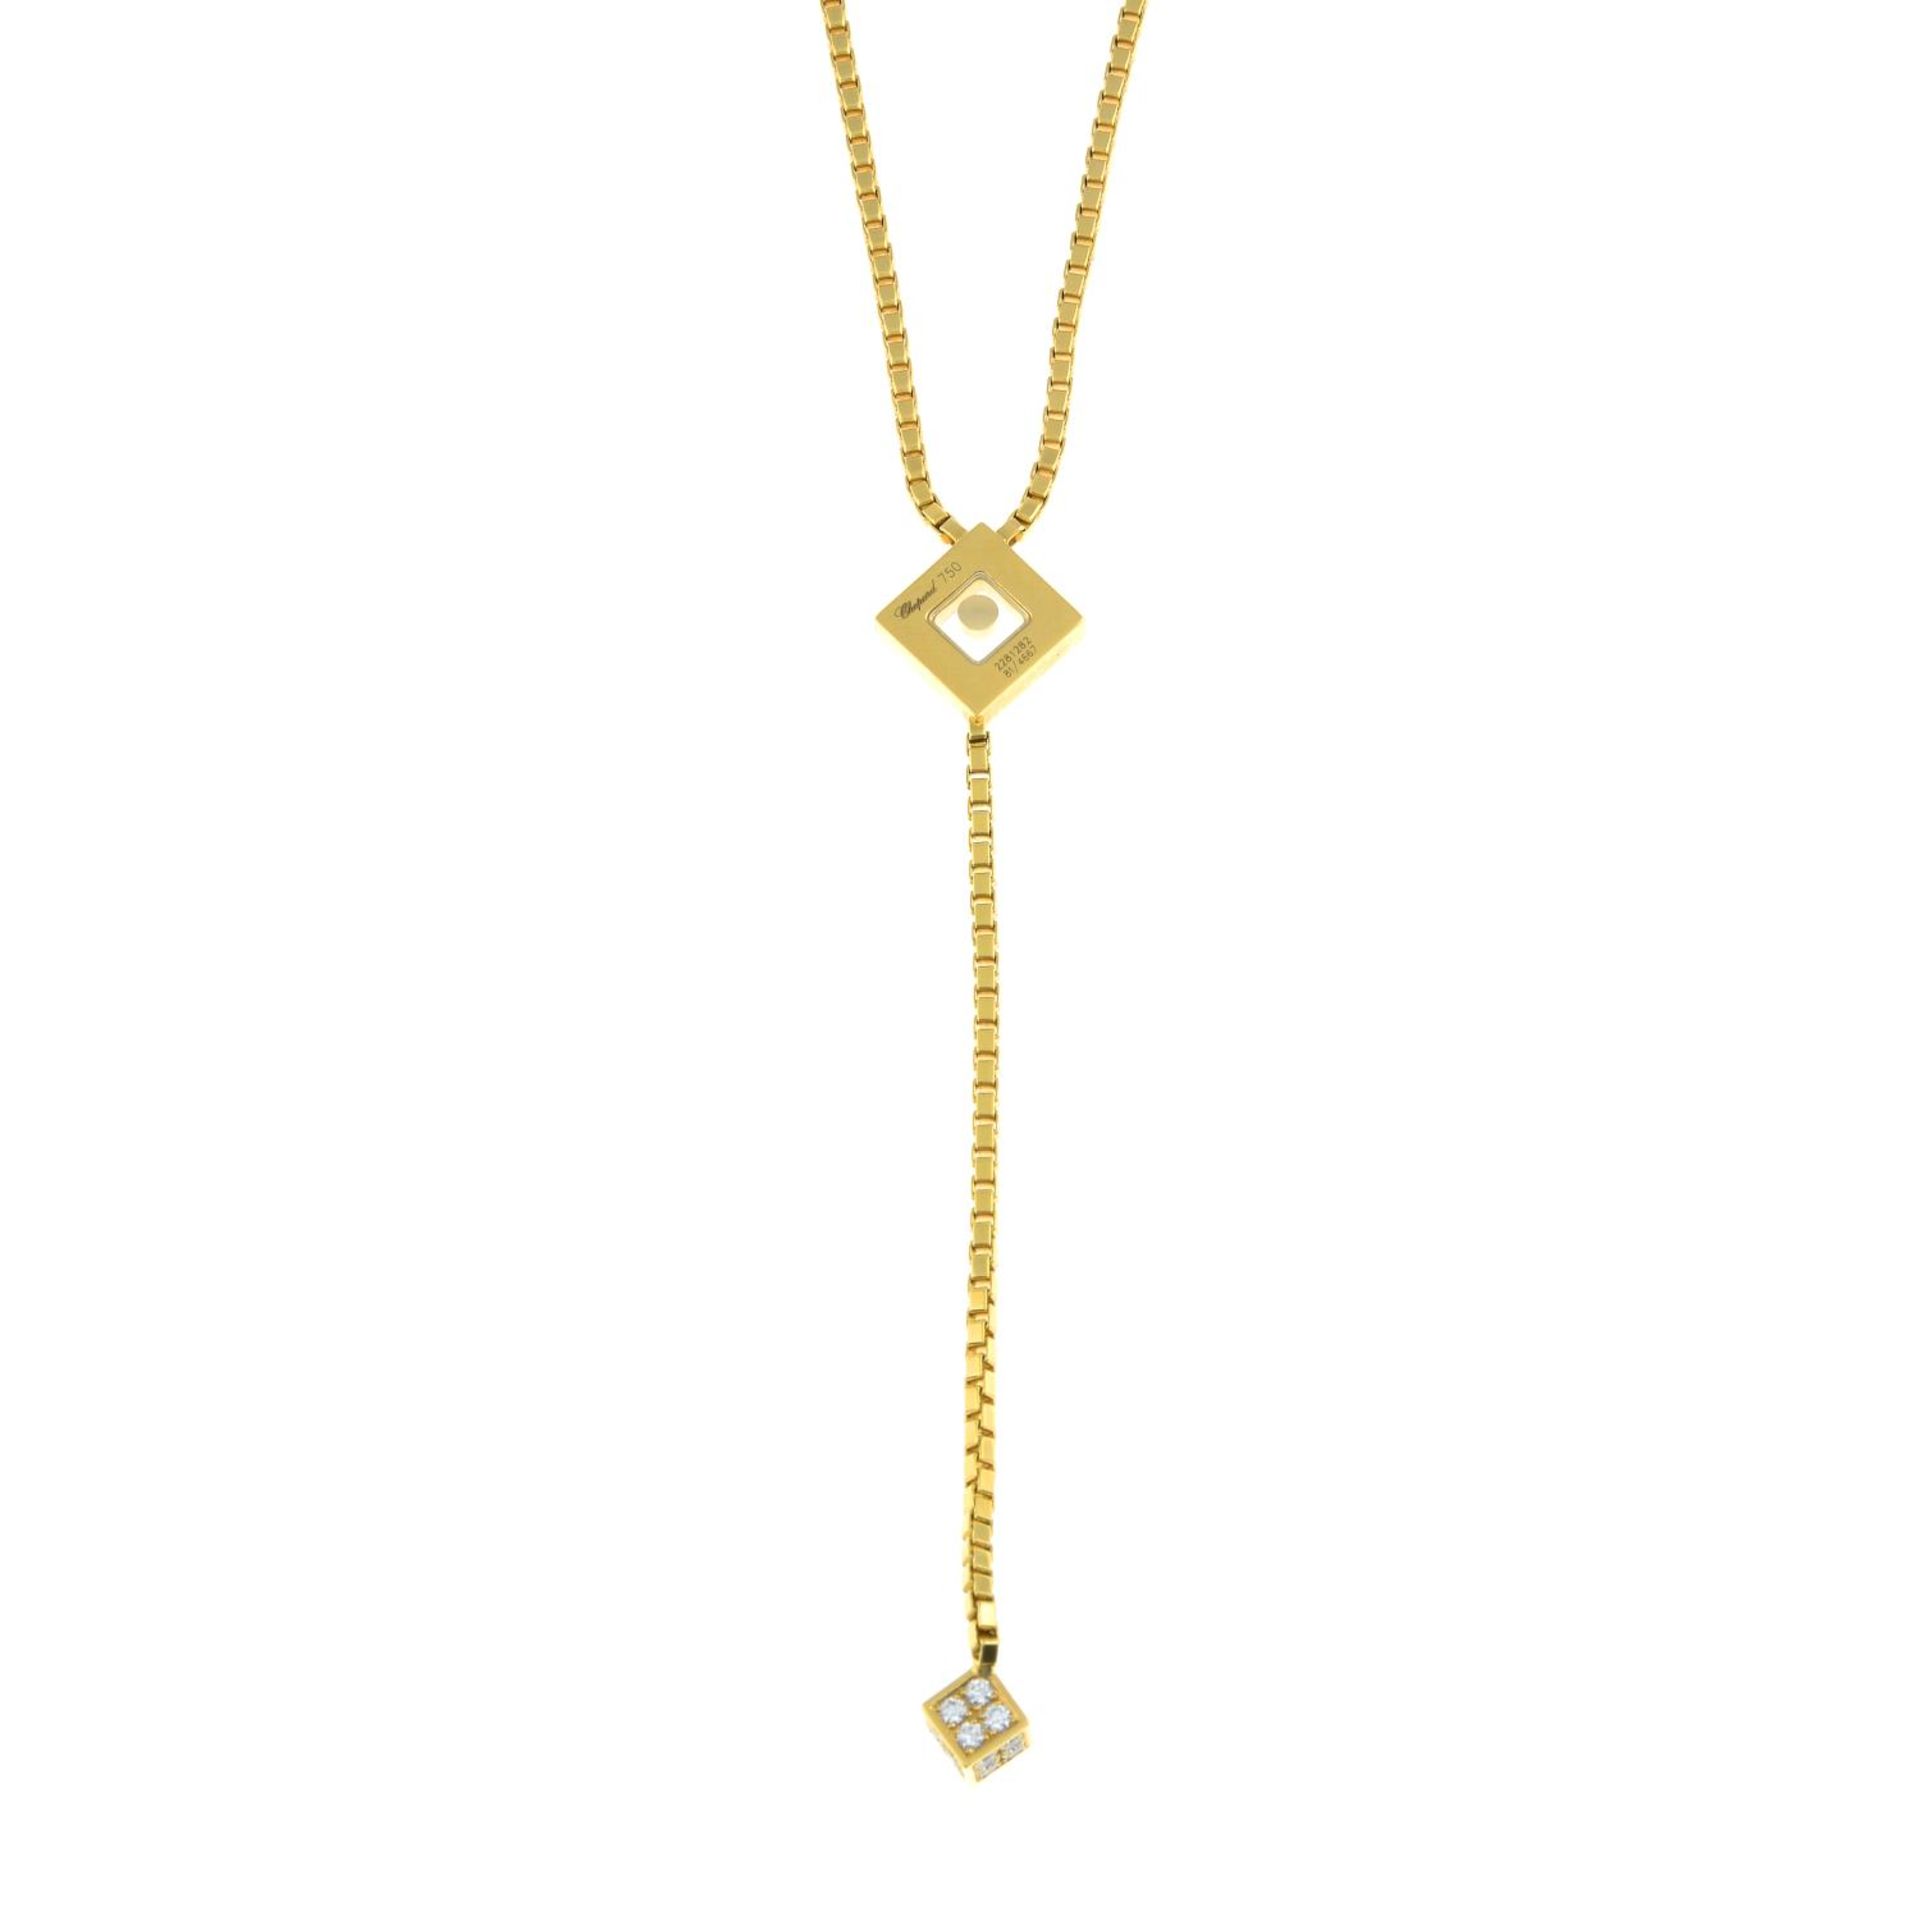 A 'Happy Diamonds' necklace, by Chopard. - Image 6 of 8